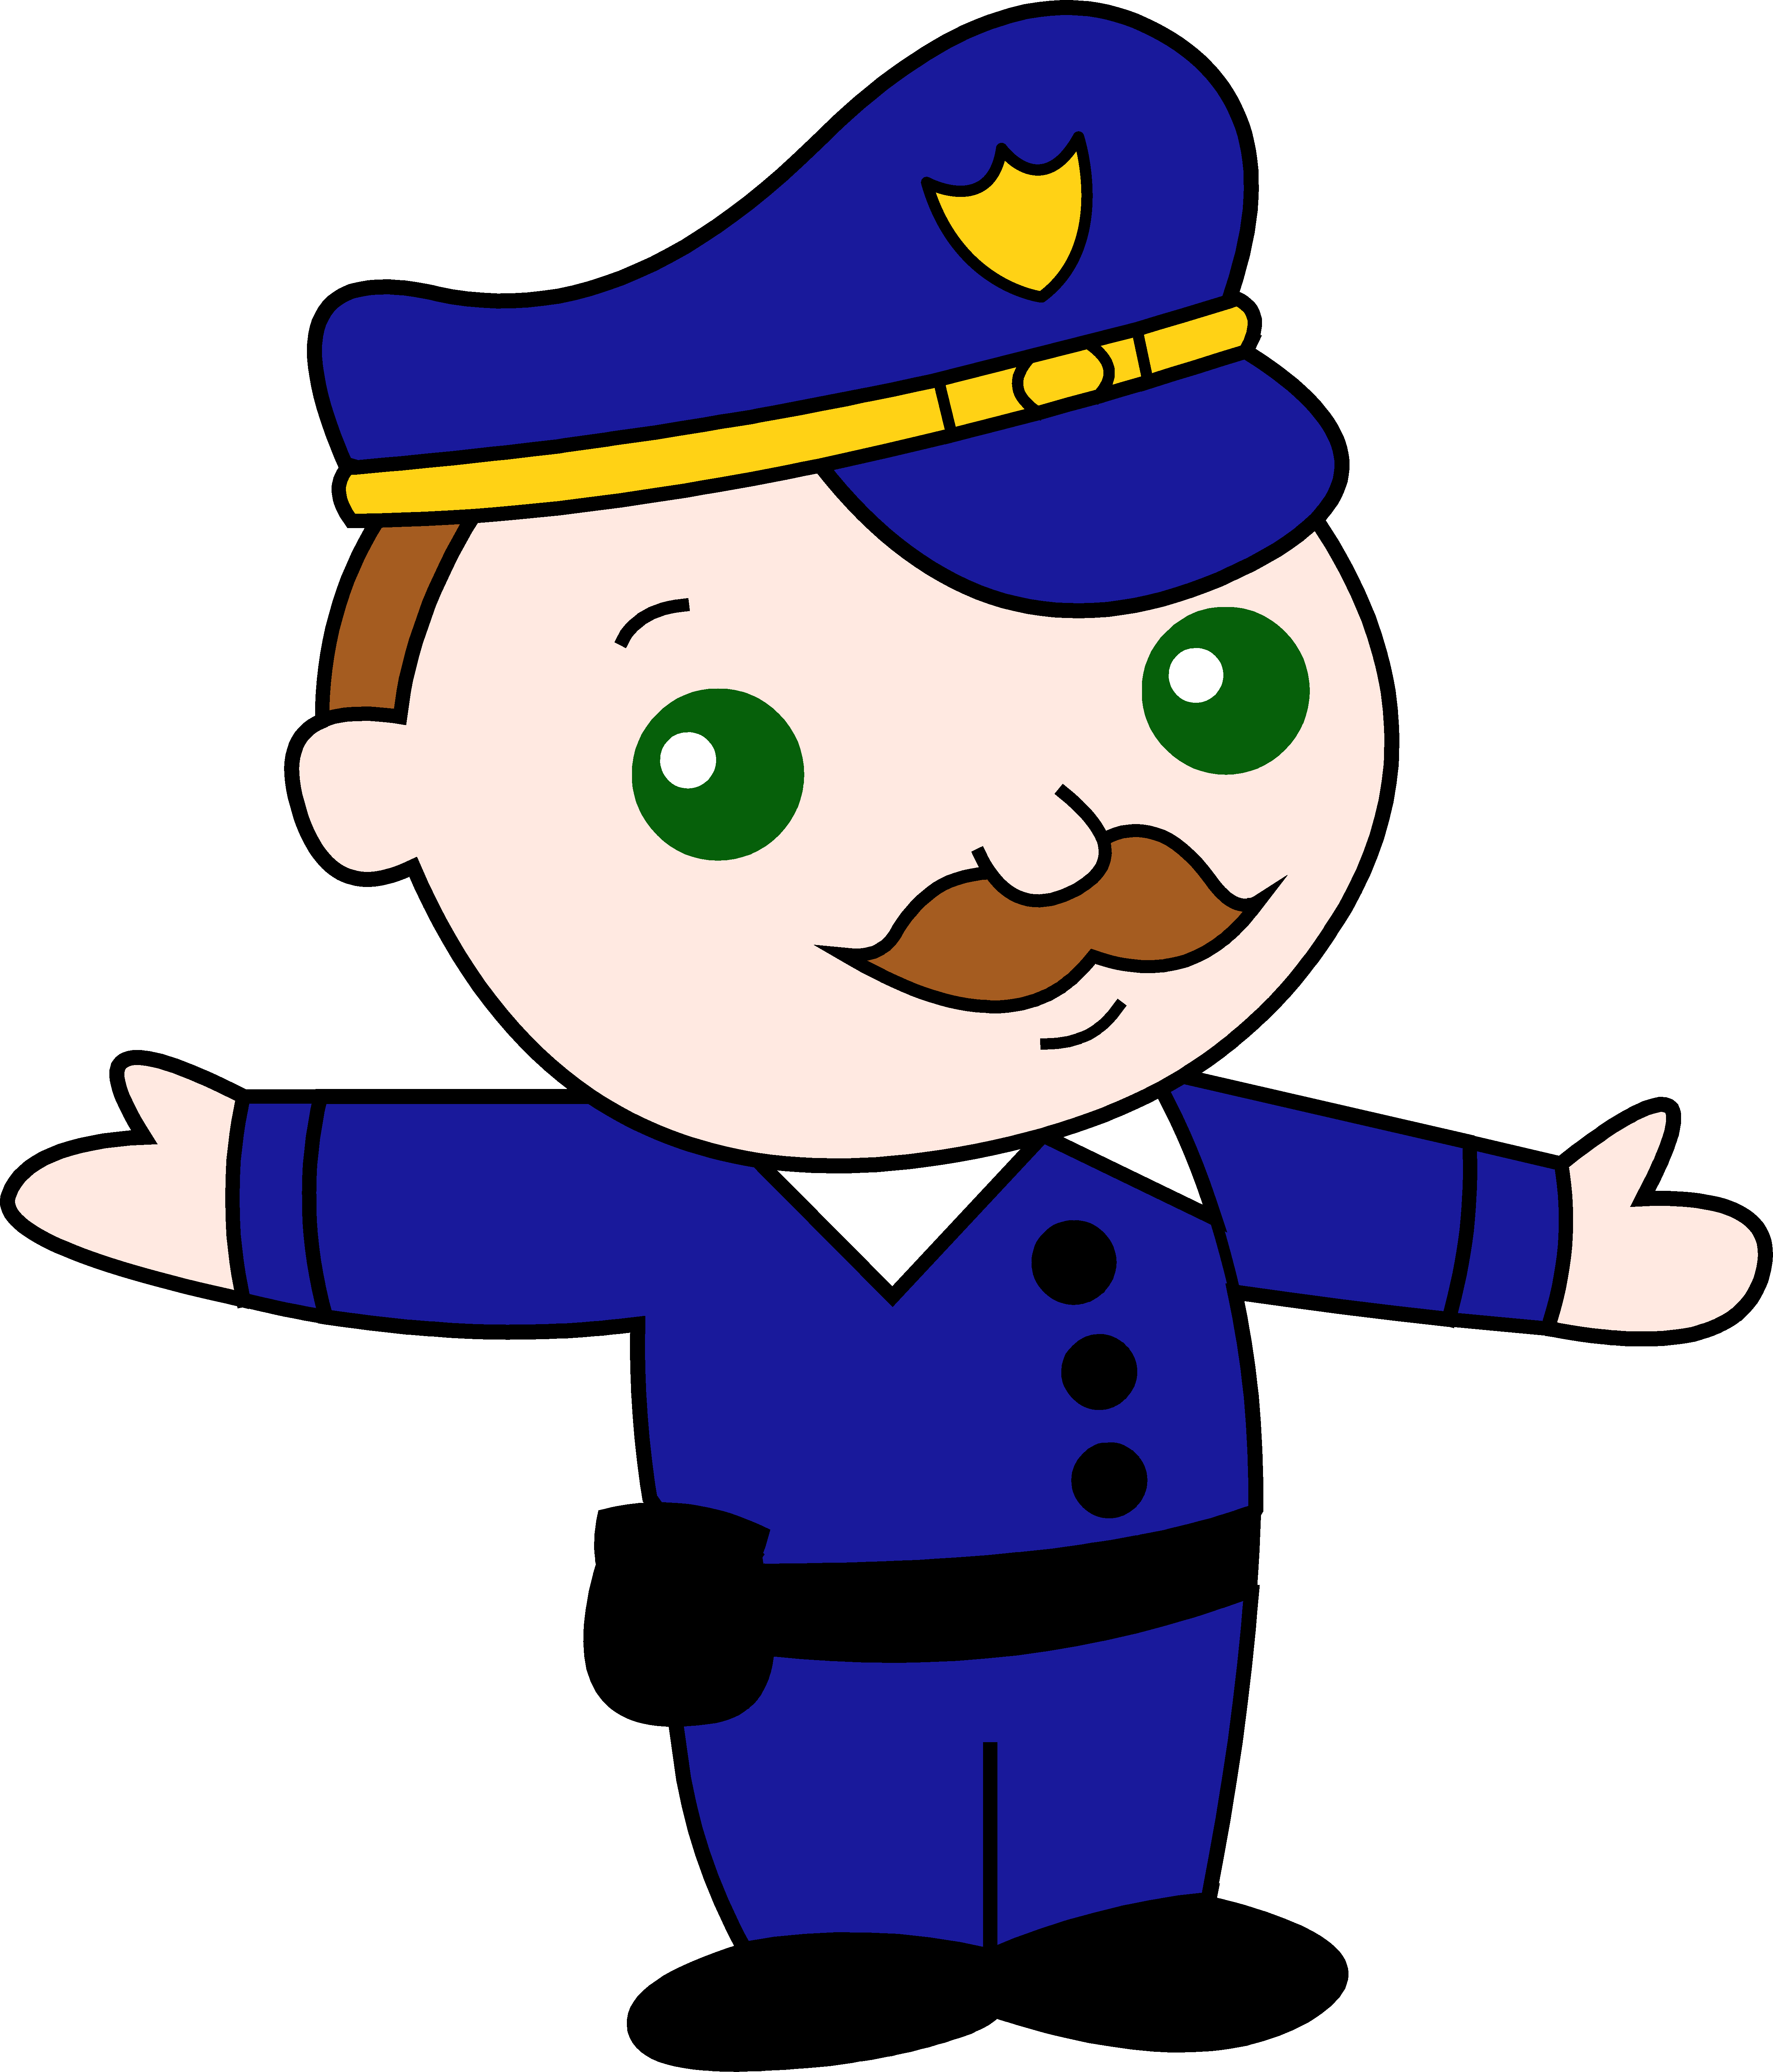 Police Officer Images | Free Download Clip Art | Free Clip Art ...